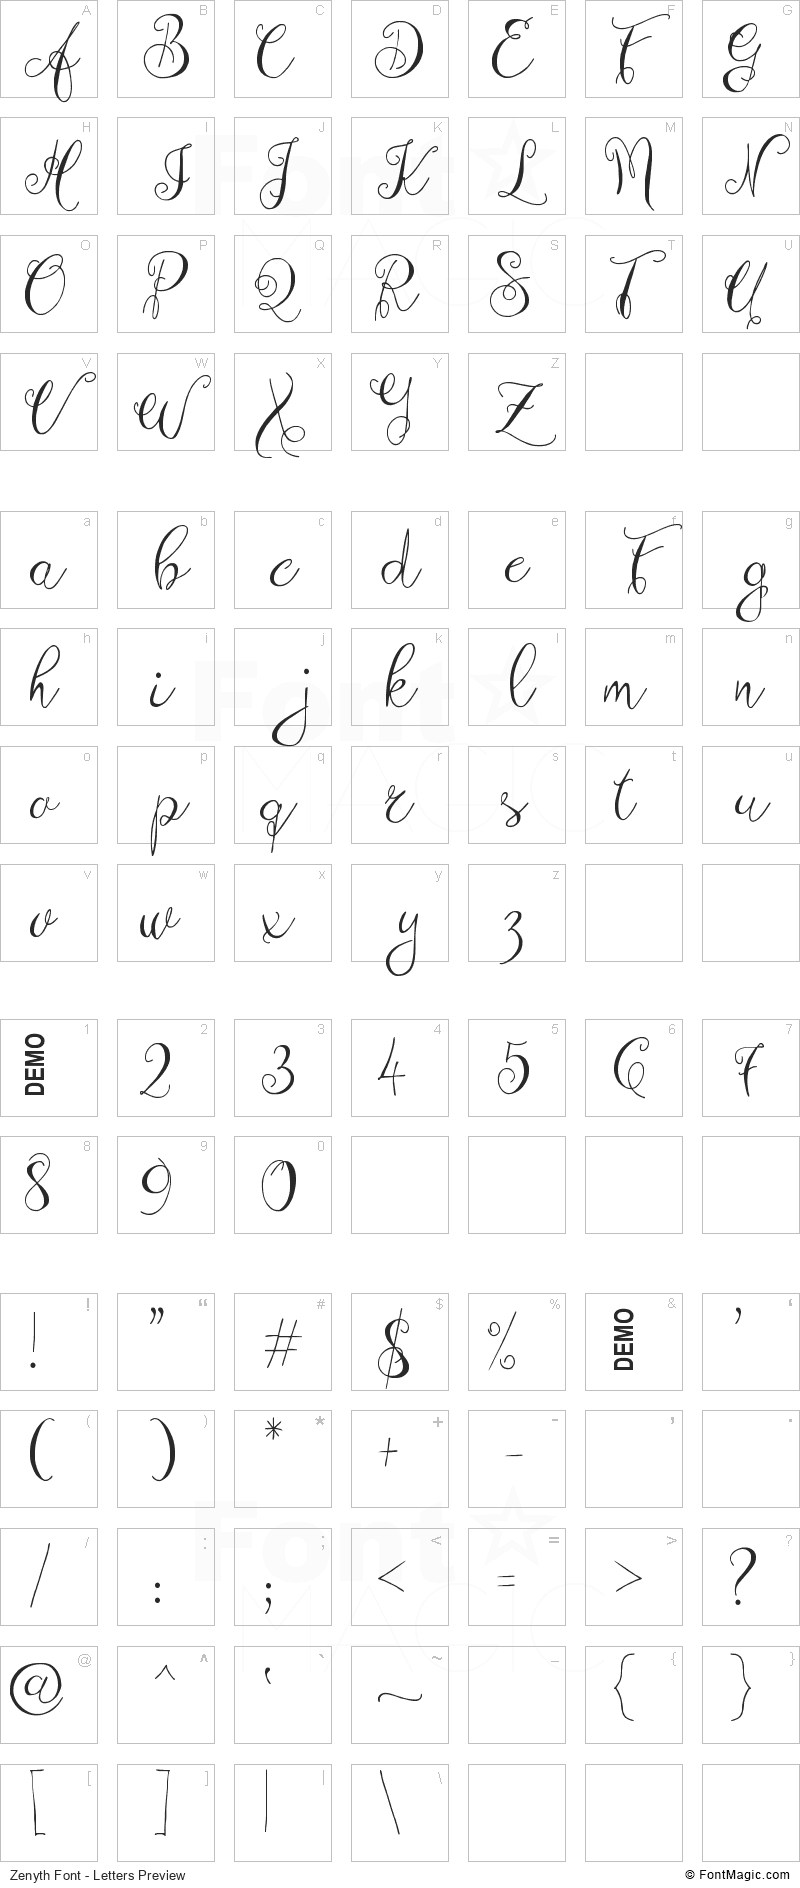 Zenyth Font - All Latters Preview Chart